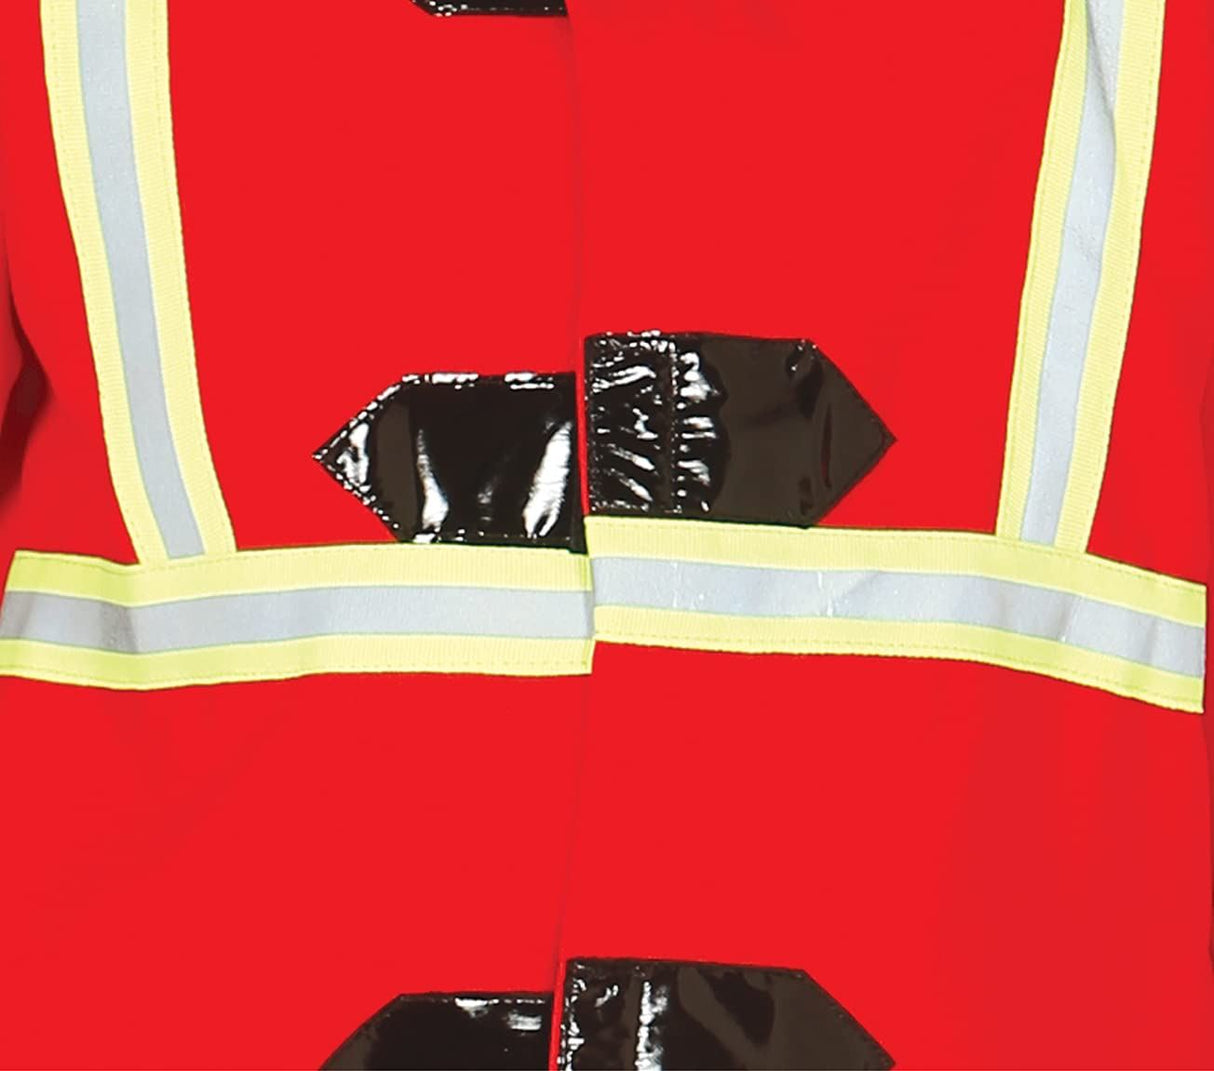 Child Deluxe Firefighter Costume - 7-9 Years